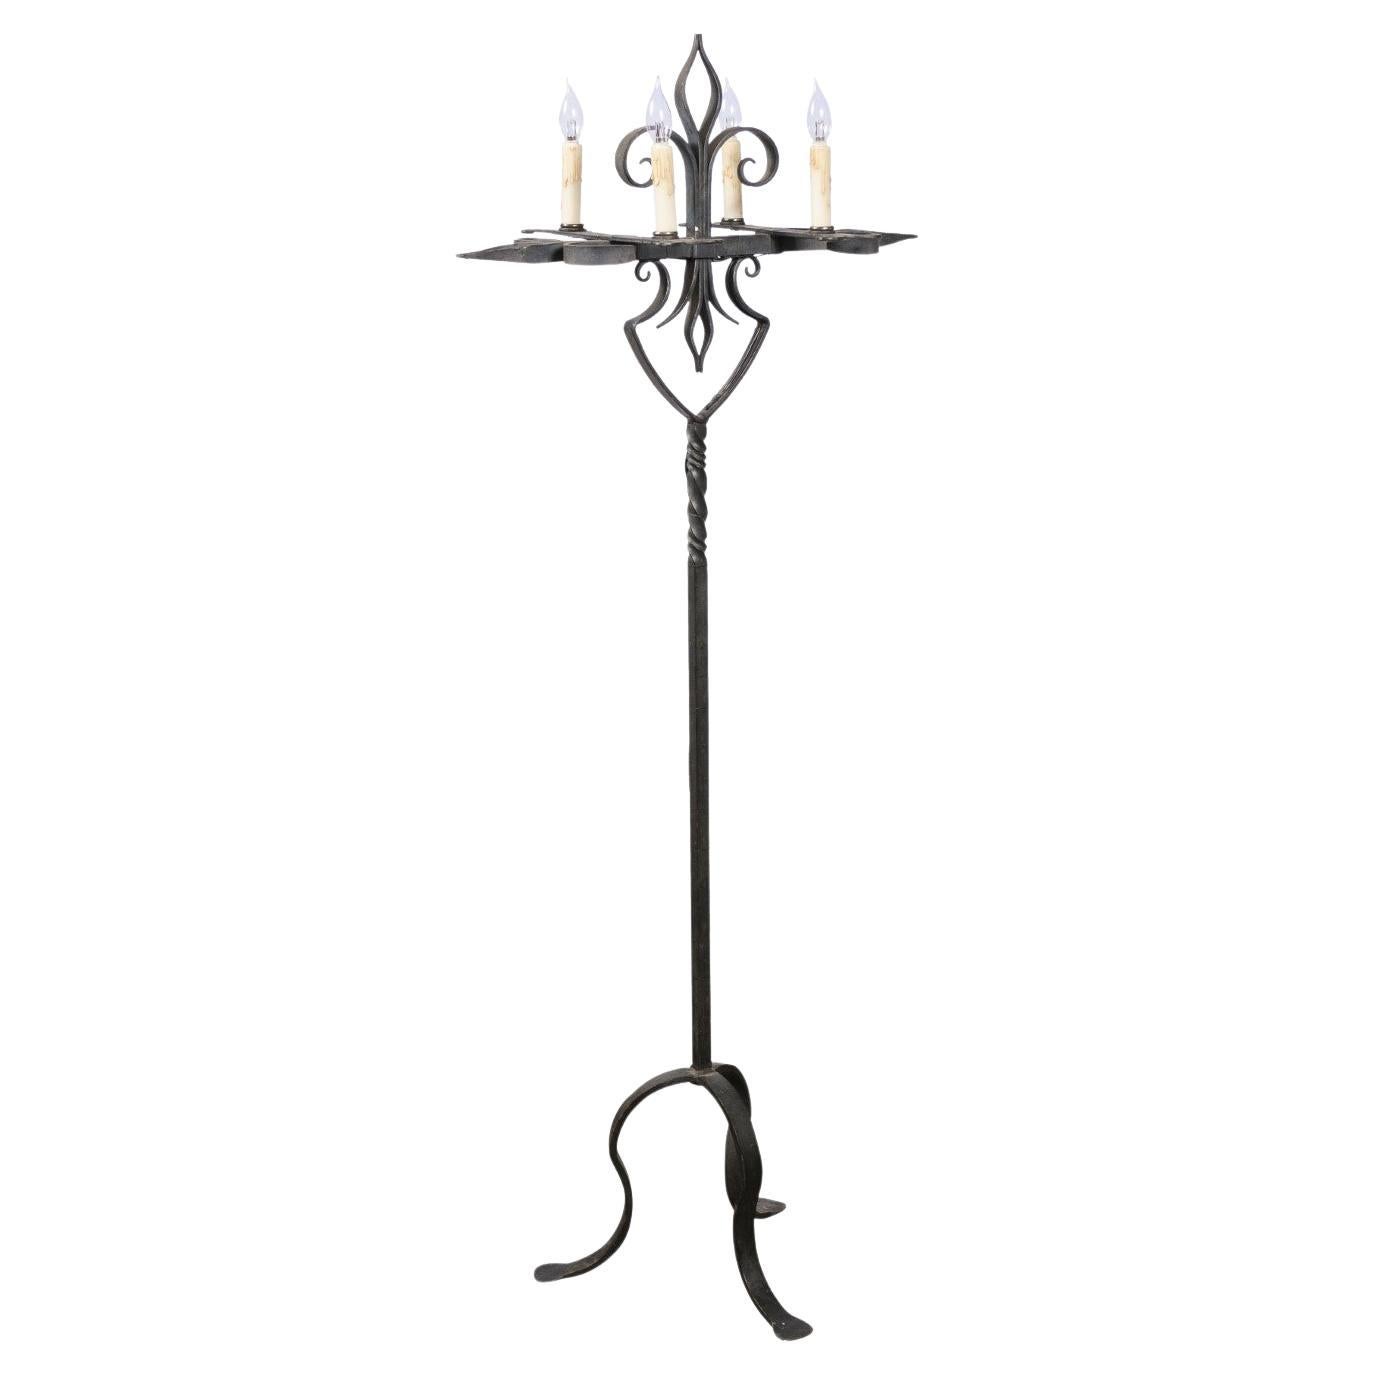 French Turn of the Century Candelabras Style Four-Light Wrought-Iron Floor Lamp